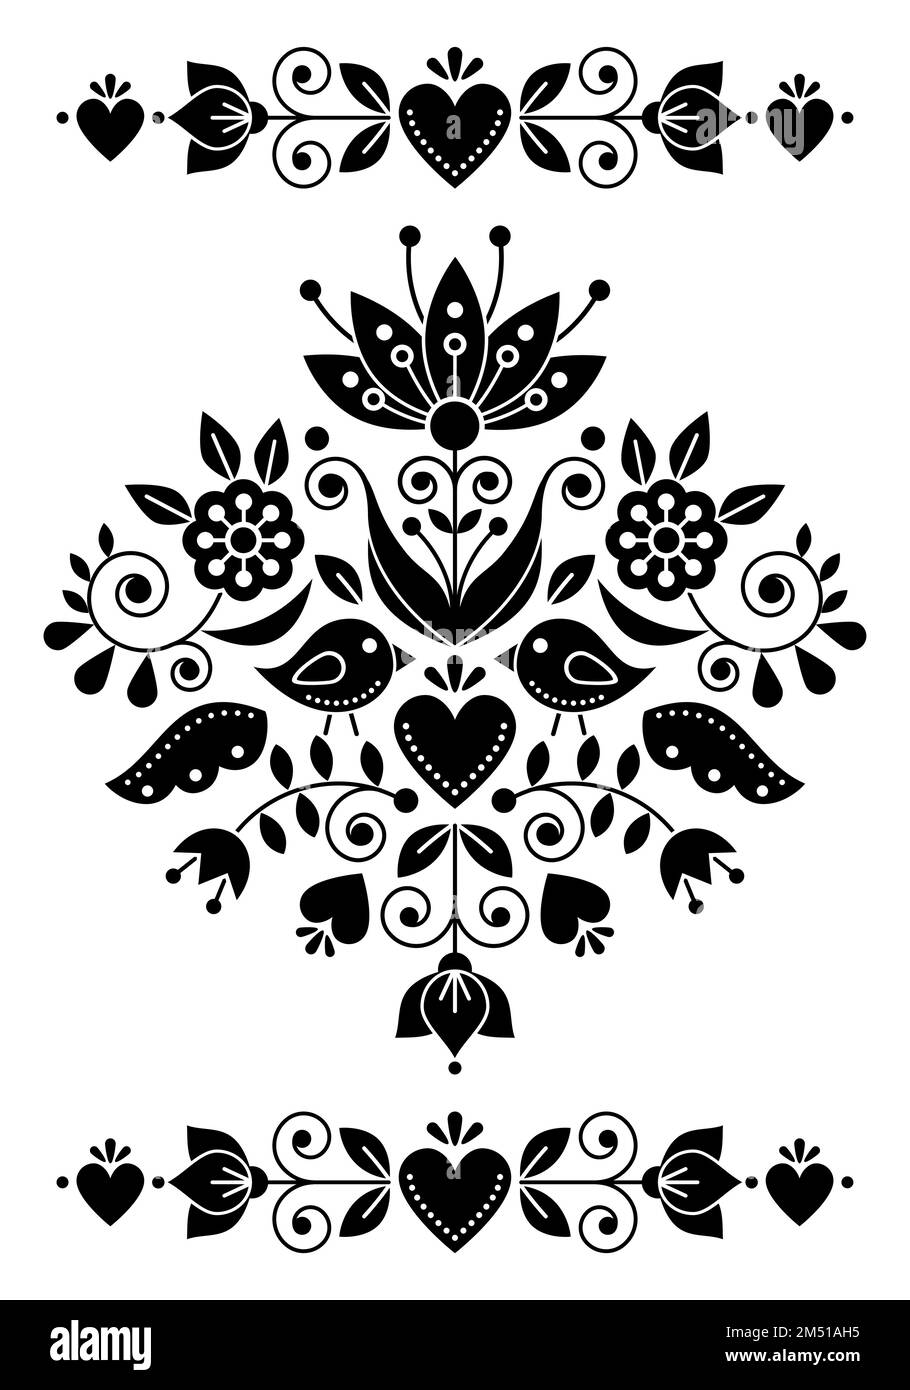 Swedish folk art vector greeting card or invitation design with birds and floral motif, black and white pattern inspired by the traditional Scandinavi Stock Vector